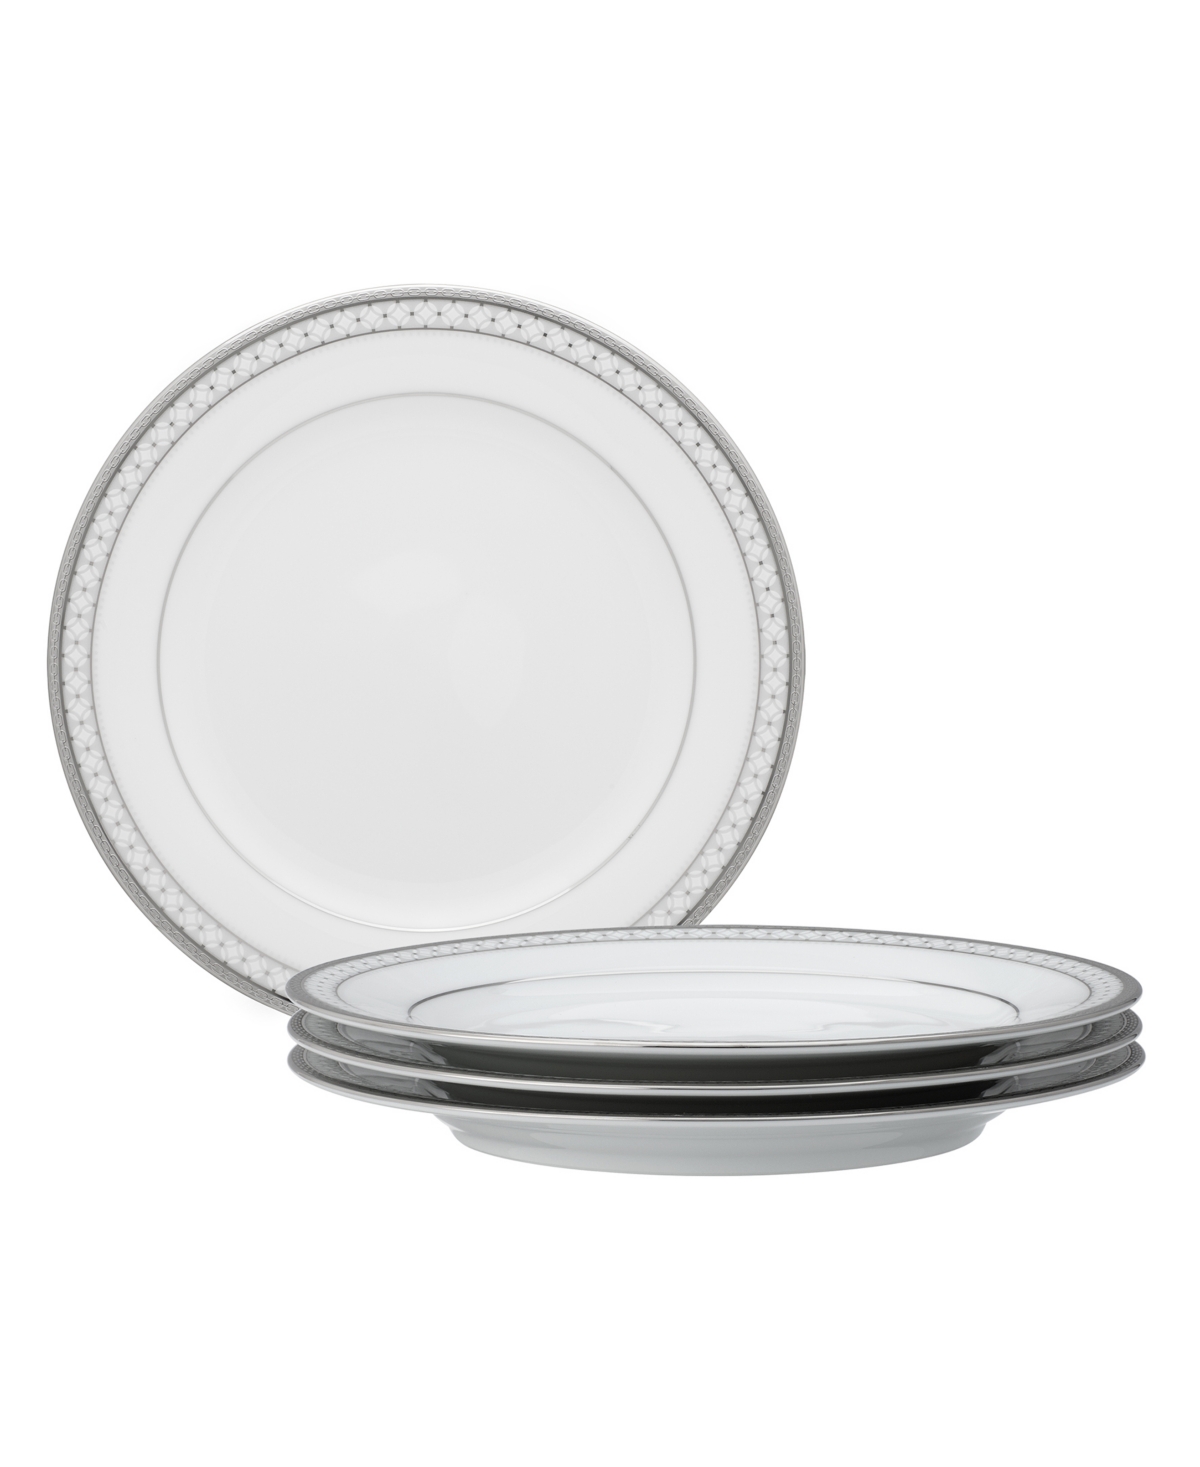 Noritake Rochester Platinum Set Of 4 Salad Plates, Service For 4 In White